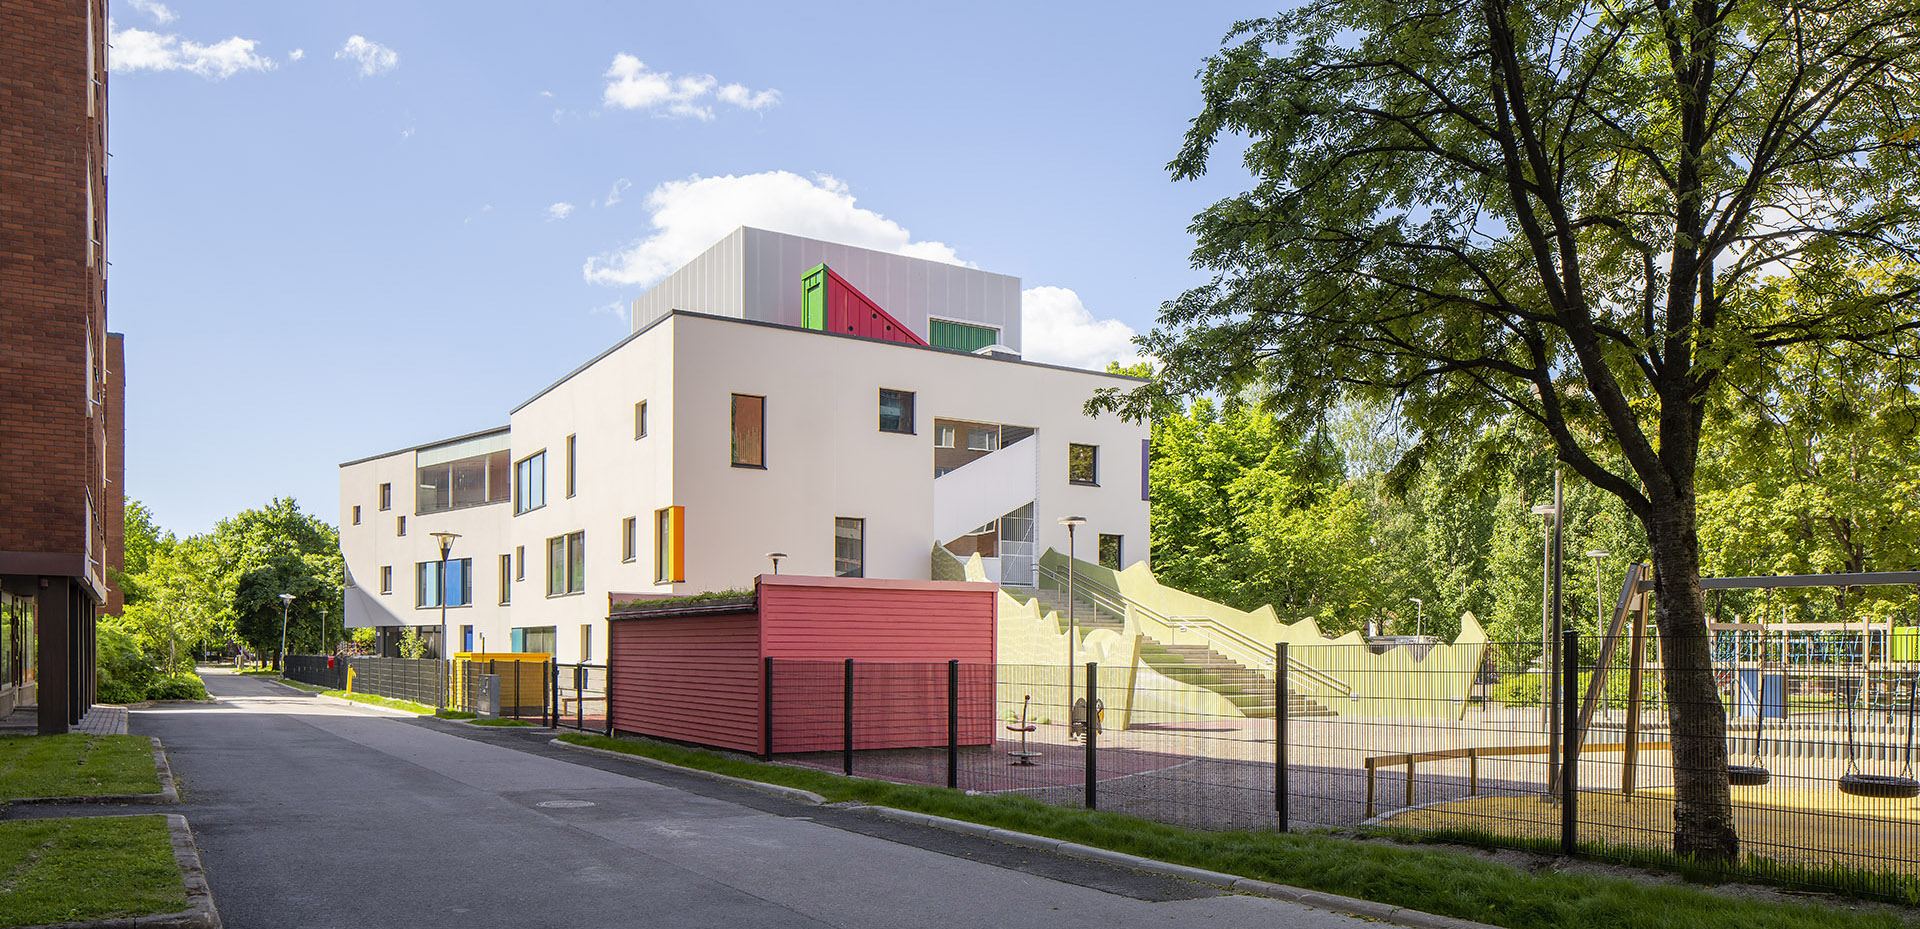 The principles of Finnish children's education guiding the architecture of the Tikkurila Day Care Center